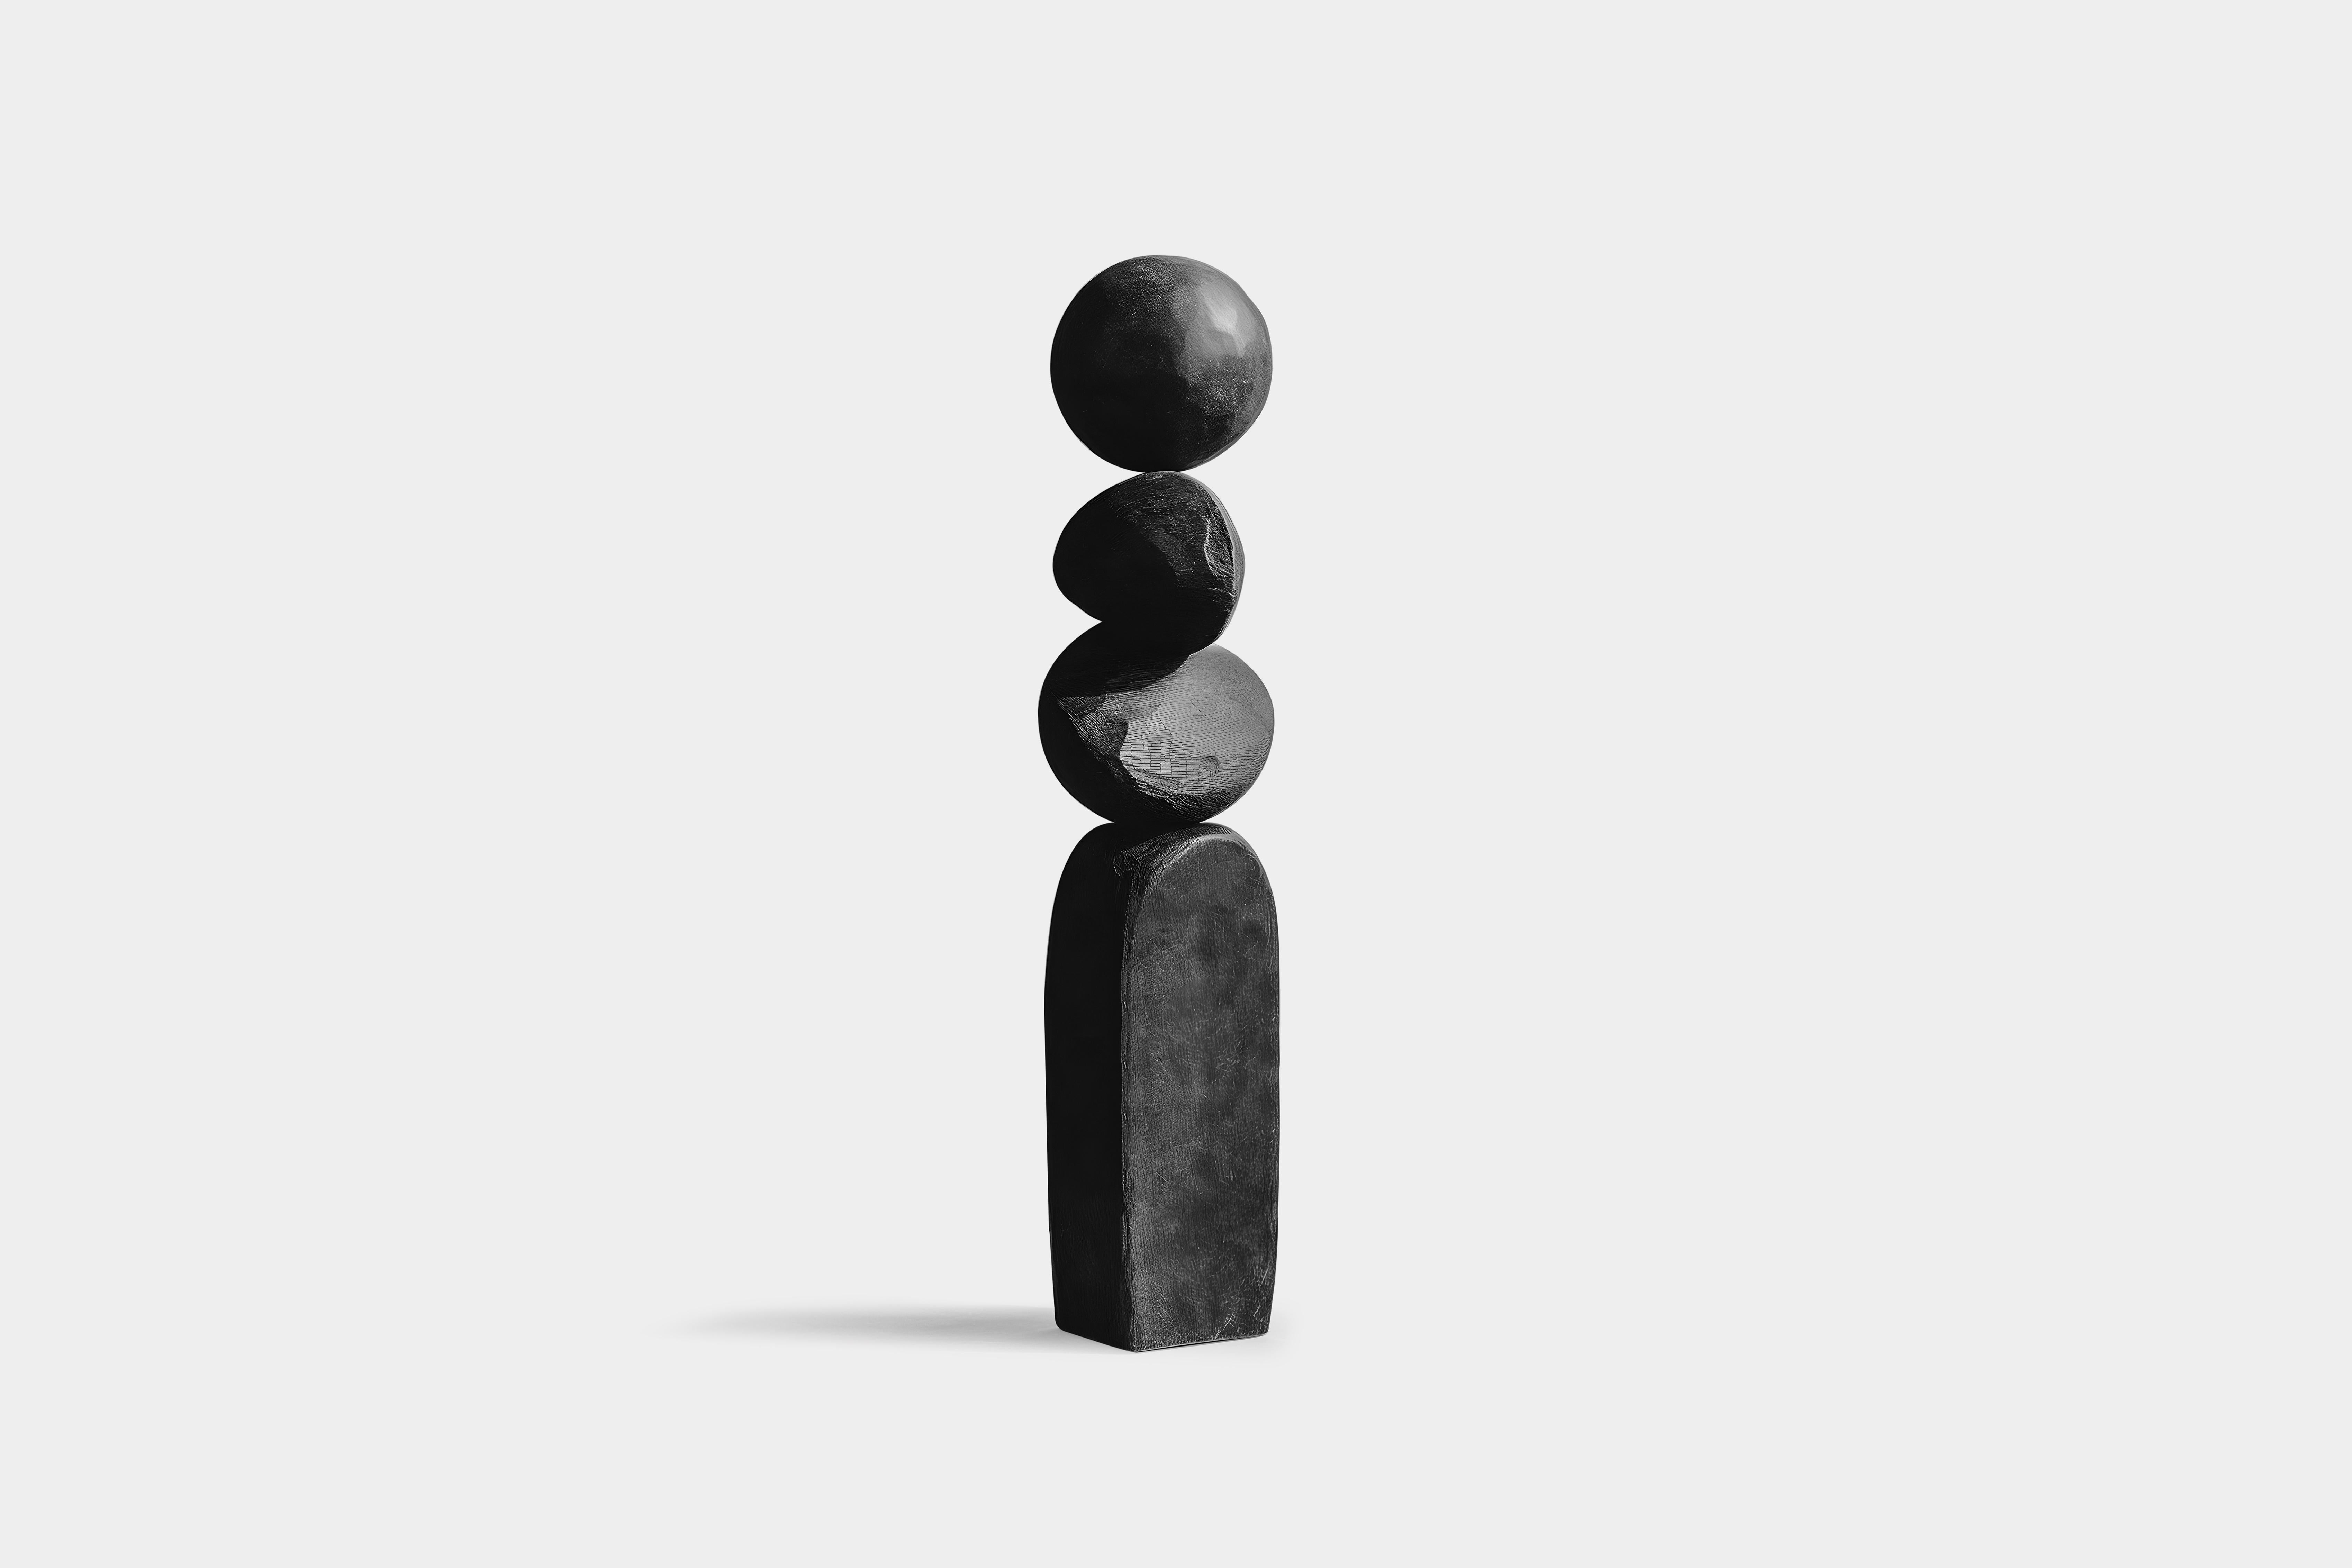 Abstract Beauty in Black Solid Wood, Escalona's Work, Still Stand No79
——


Joel Escalona's wooden standing sculptures are objects of raw beauty and serene grace. Each one is a testament to the power of the material, with smooth curves that flow